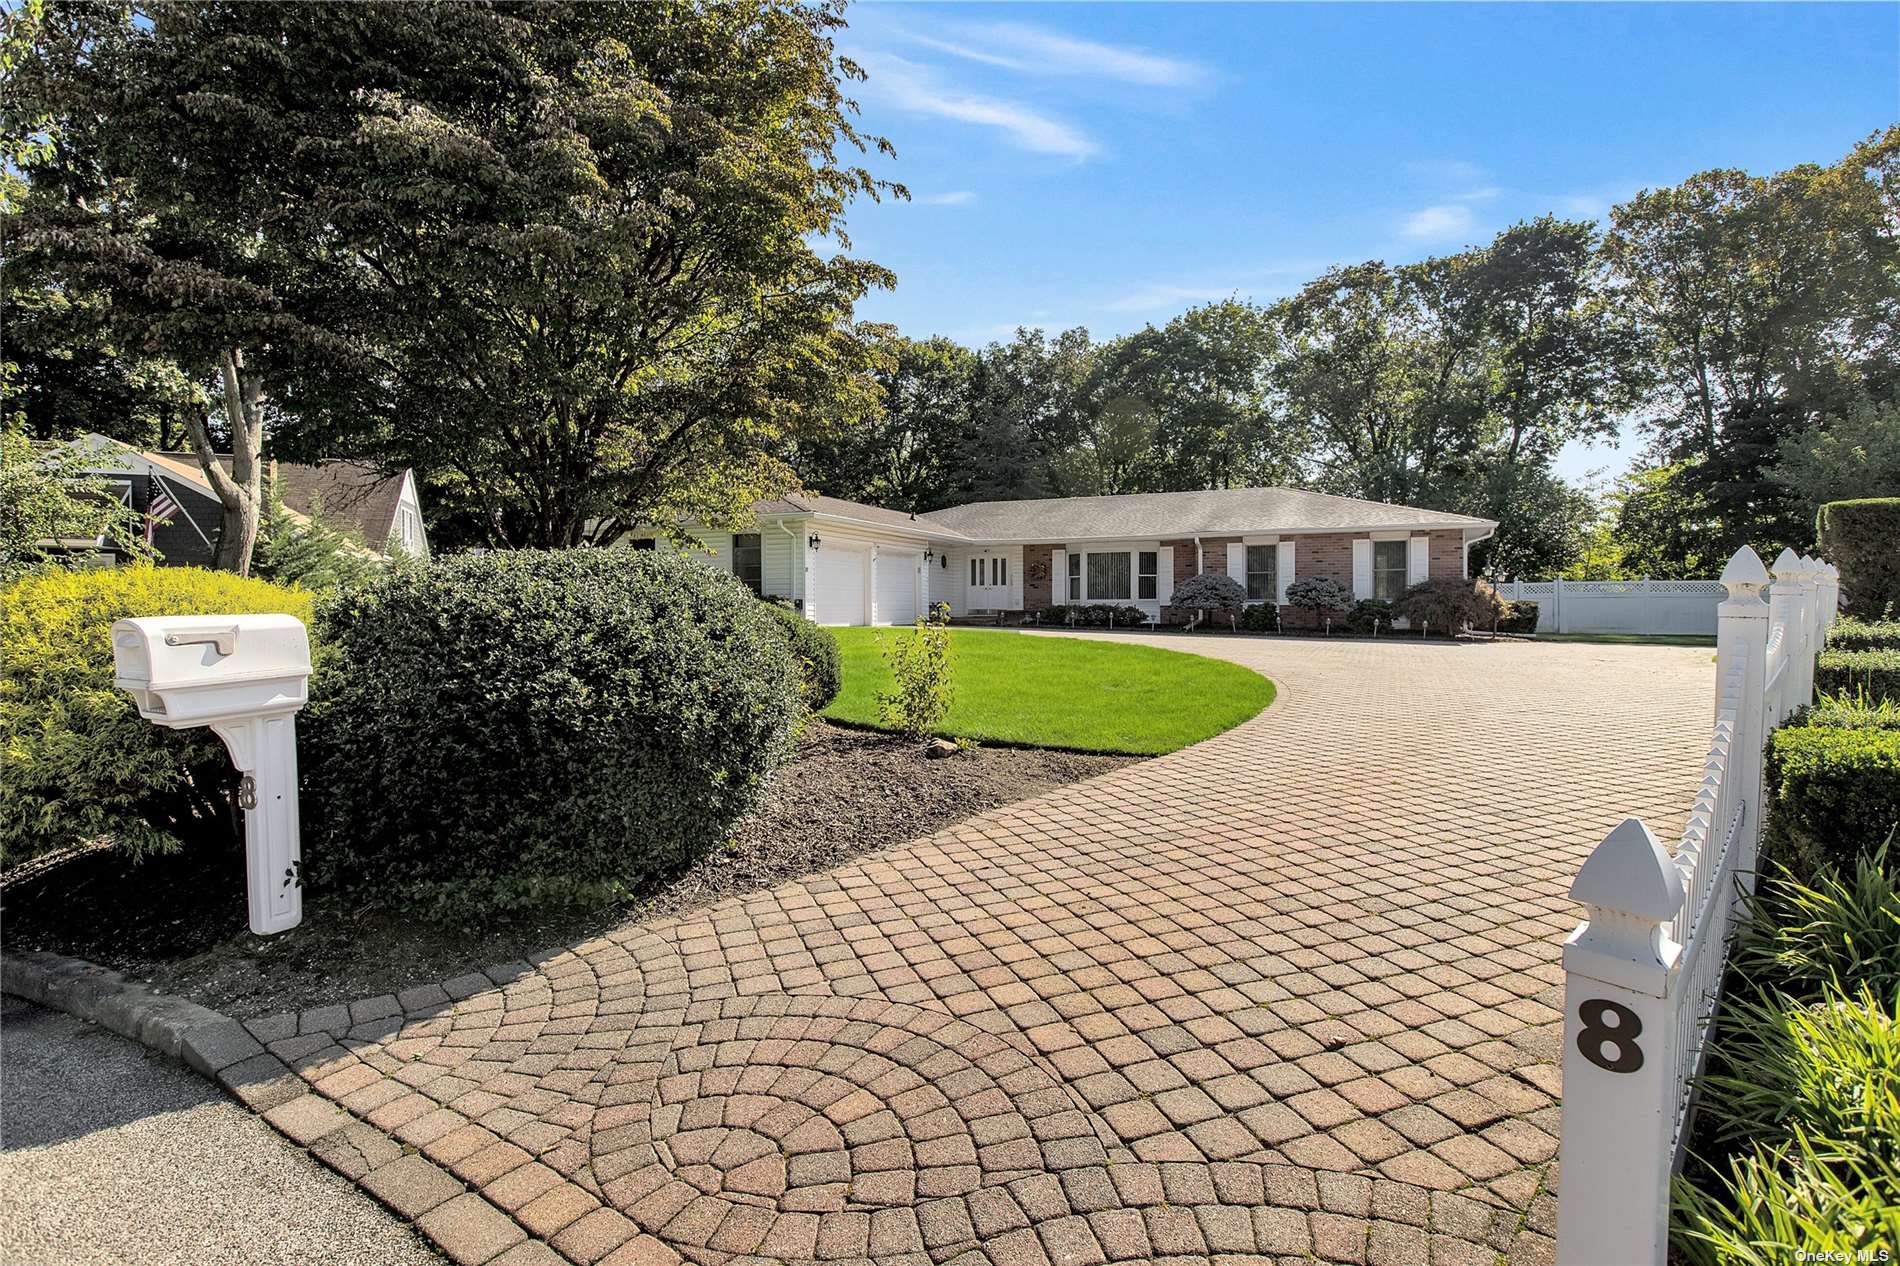 Property for Sale at 8 Half Acre Ct, Smithtown, Hamptons, NY - Bedrooms: 4 
Bathrooms: 3  - $825,000